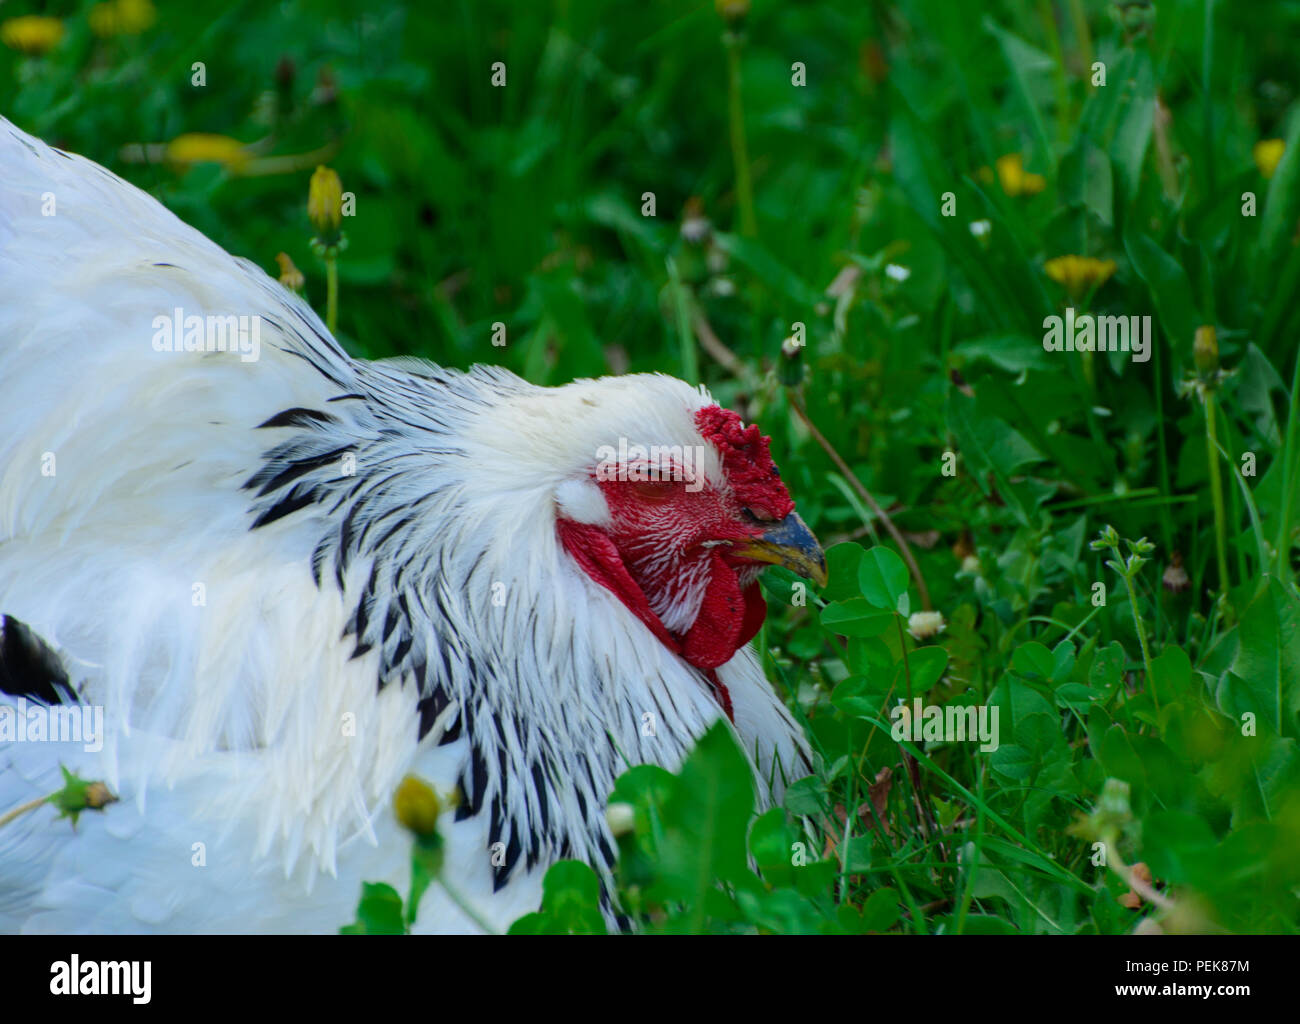 https://c8.alamy.com/comp/PEK87M/a-very-large-brahma-chicken-with-an-arco-red-comb-on-its-head-and-black-and-white-color-grazing-on-the-background-of-a-juicy-green-grass-PEK87M.jpg